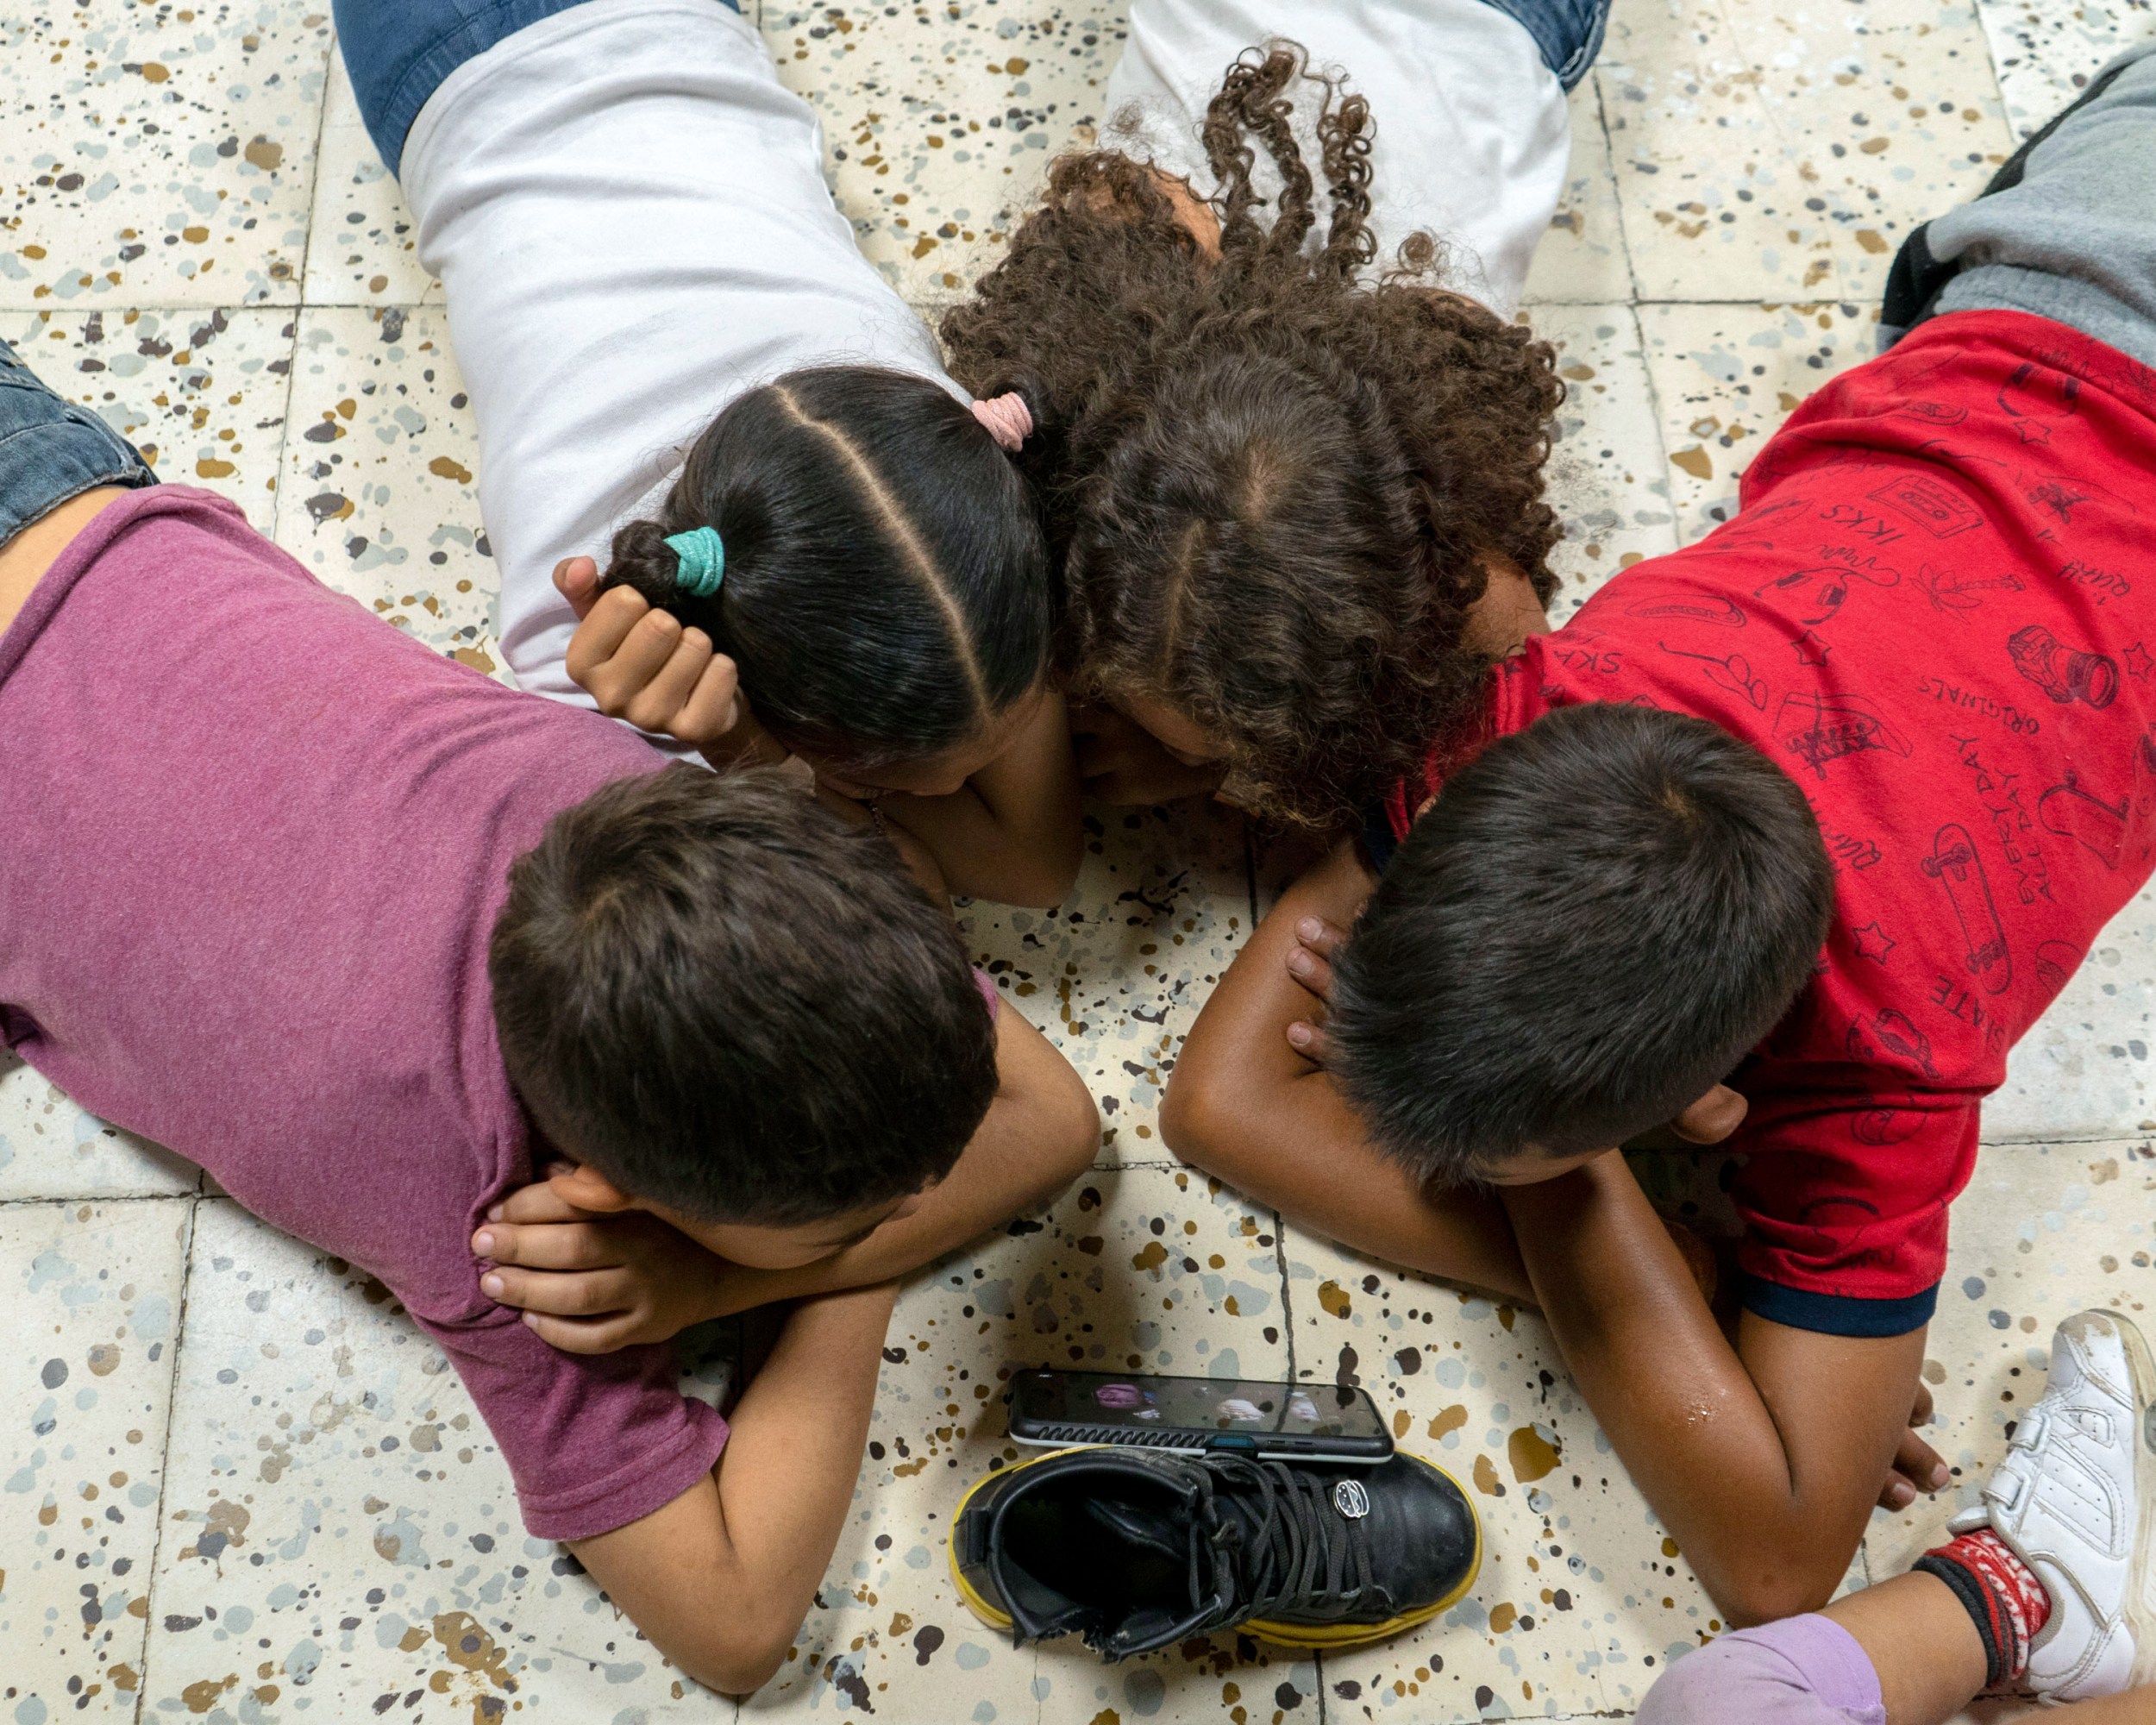 Four children lay on their stomachs on the floor around a cell phone propped up against a shoe.